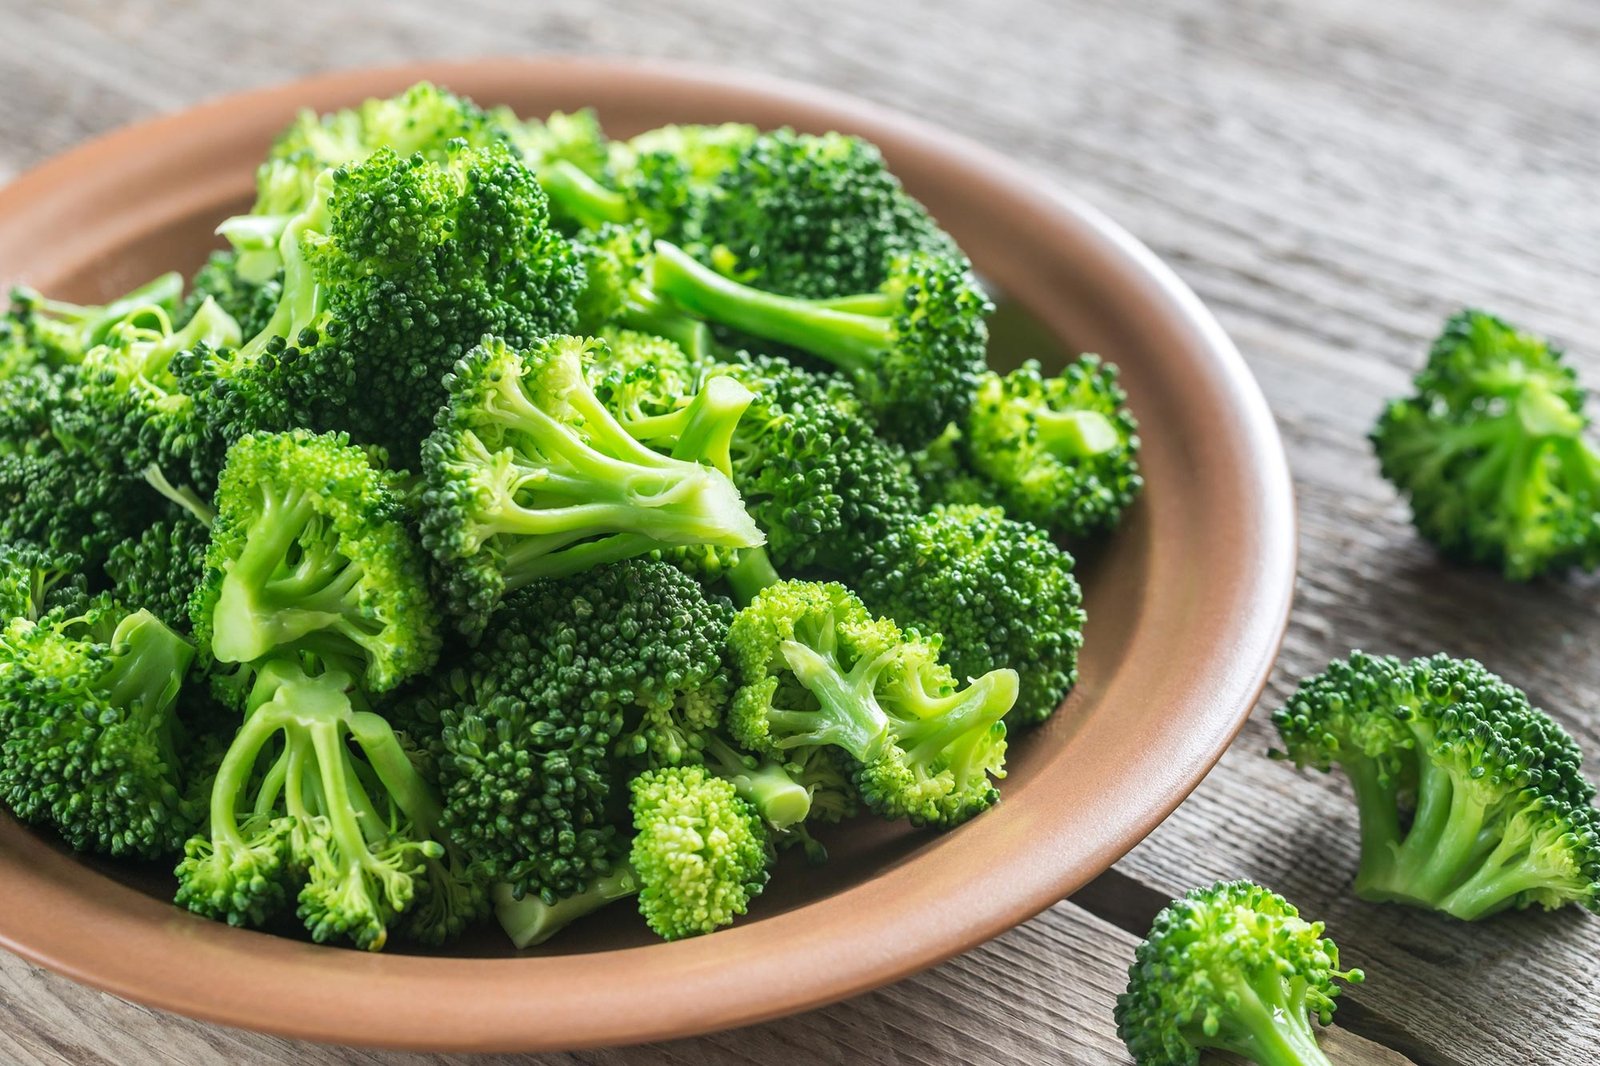 Scientists Crack the Code on Broccoli’s Health Benefits